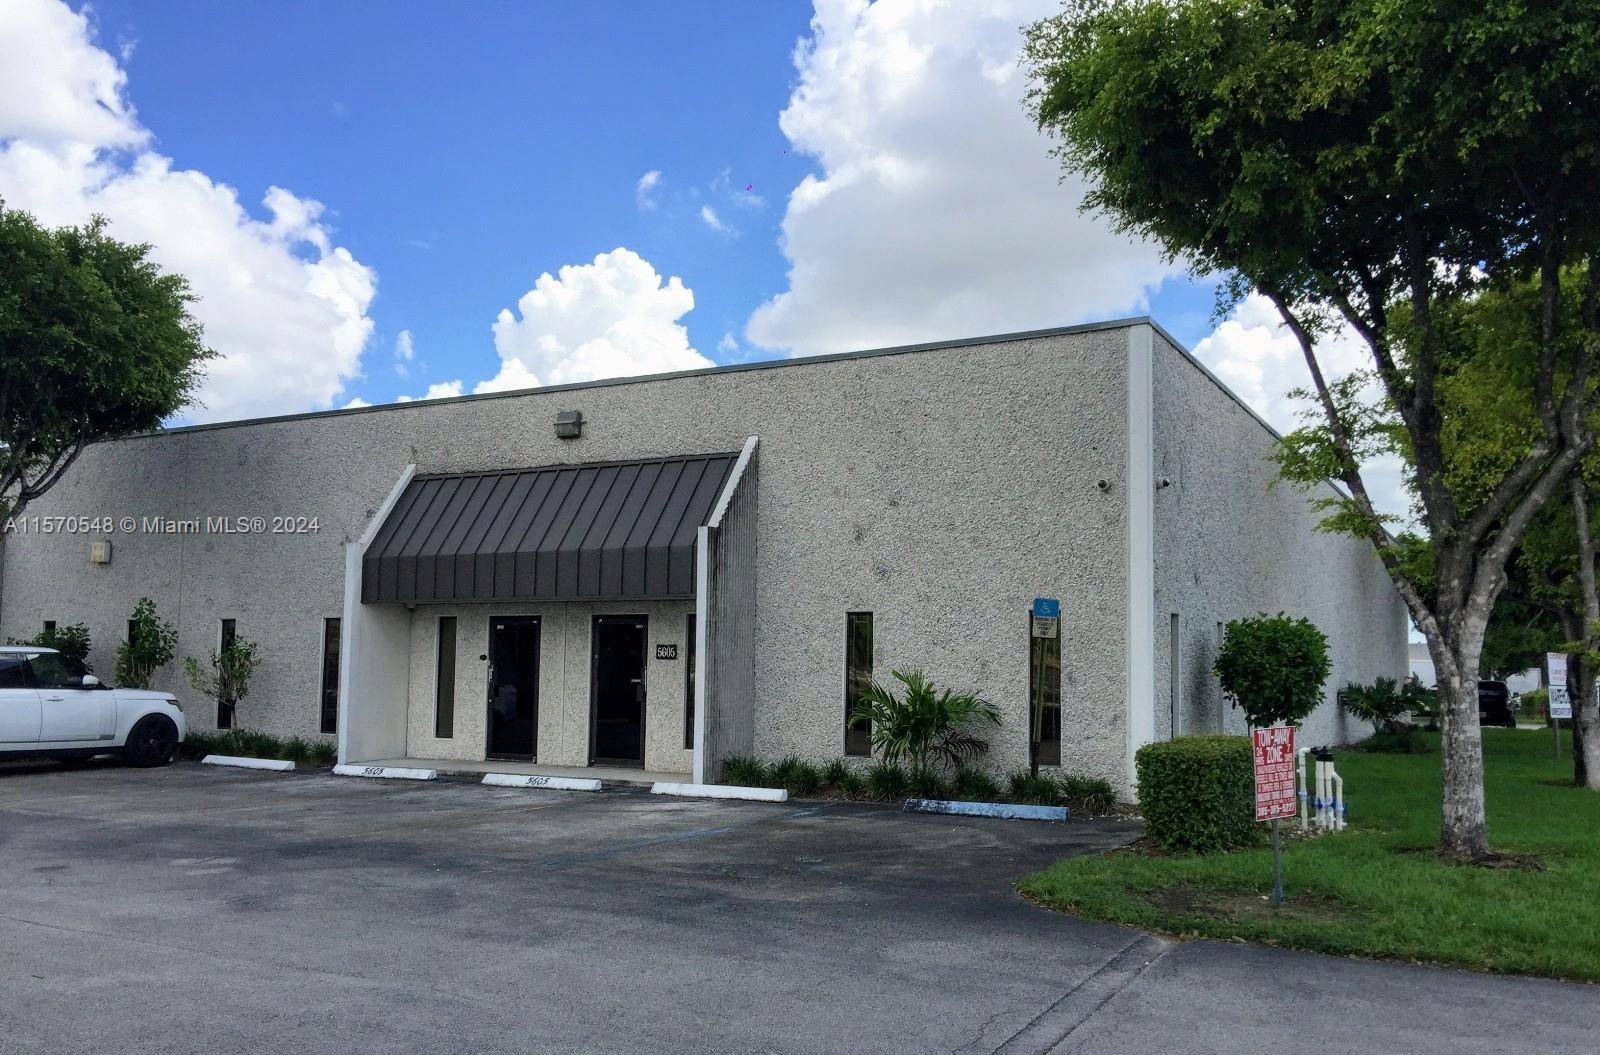 Excellent 5, 472 sq ft office warehouse flex space available for lease NNN.